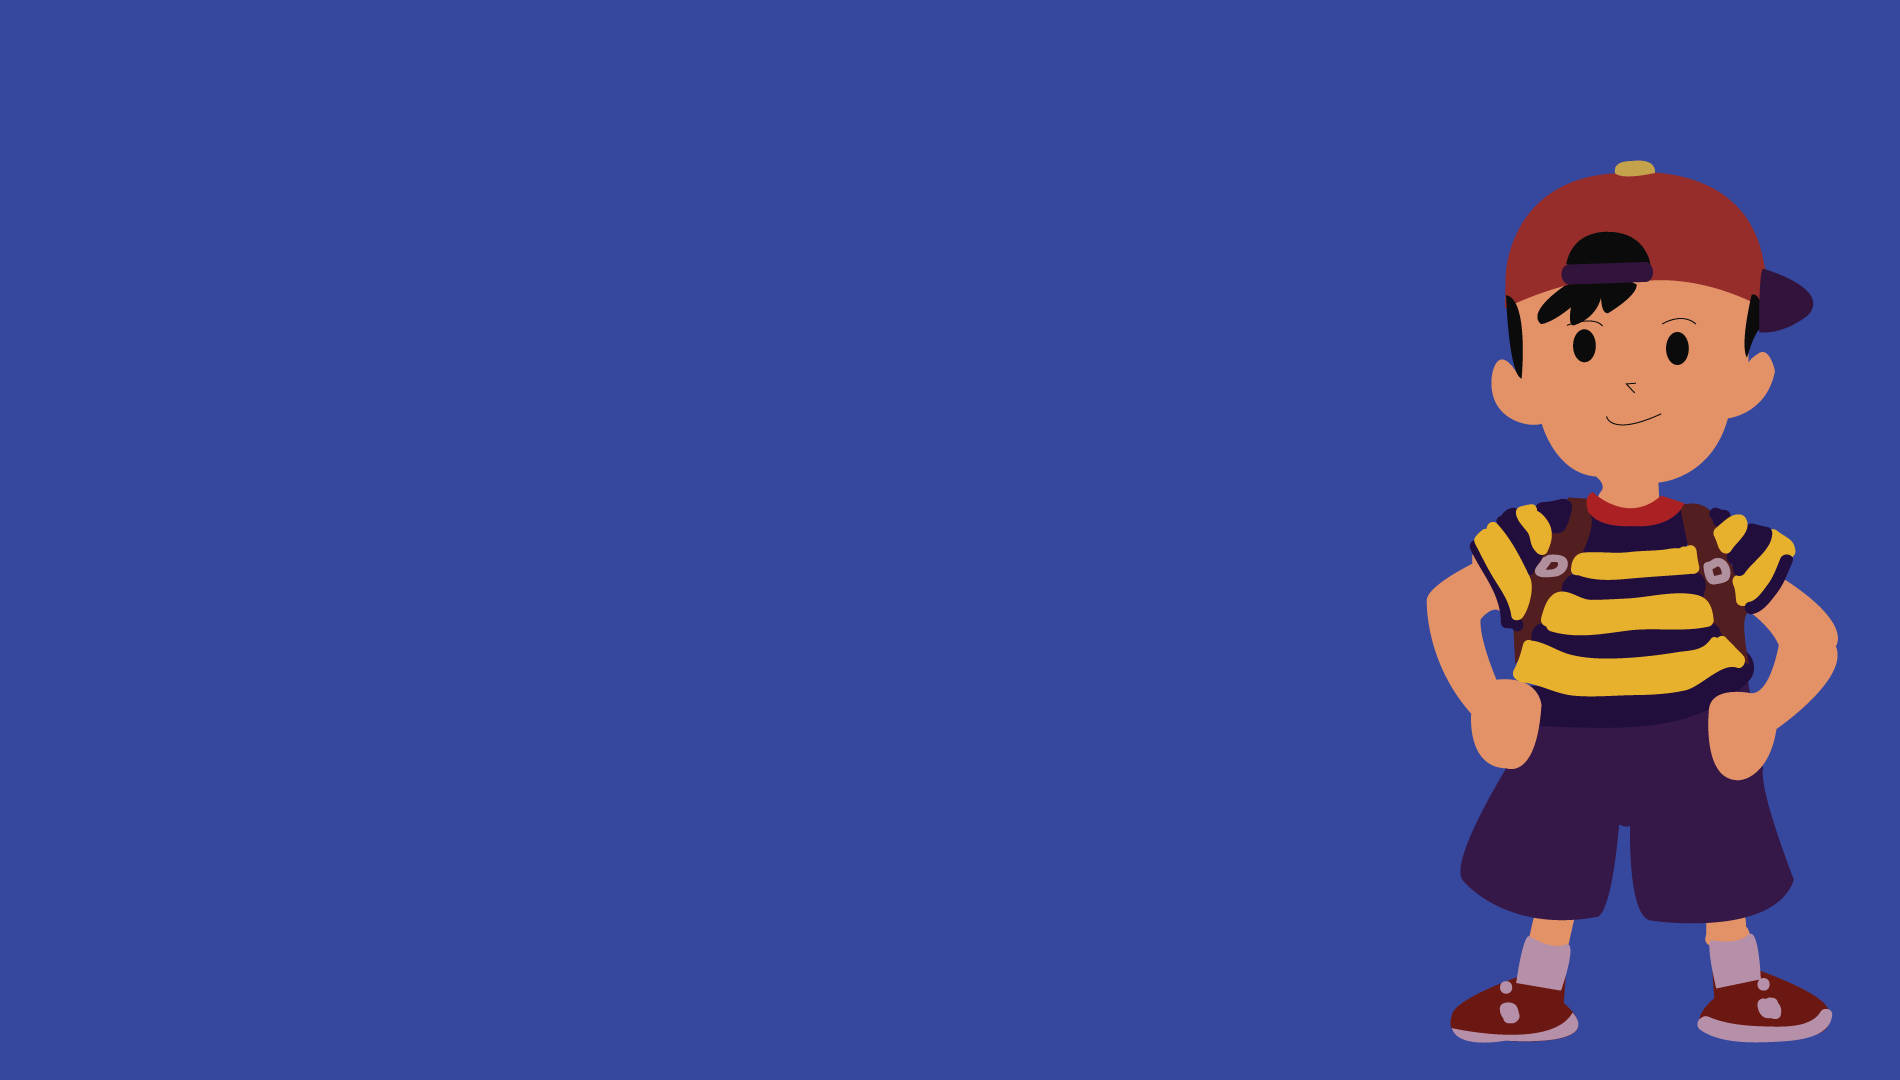 Minimalist Ness Of Earthbound In Blue Background